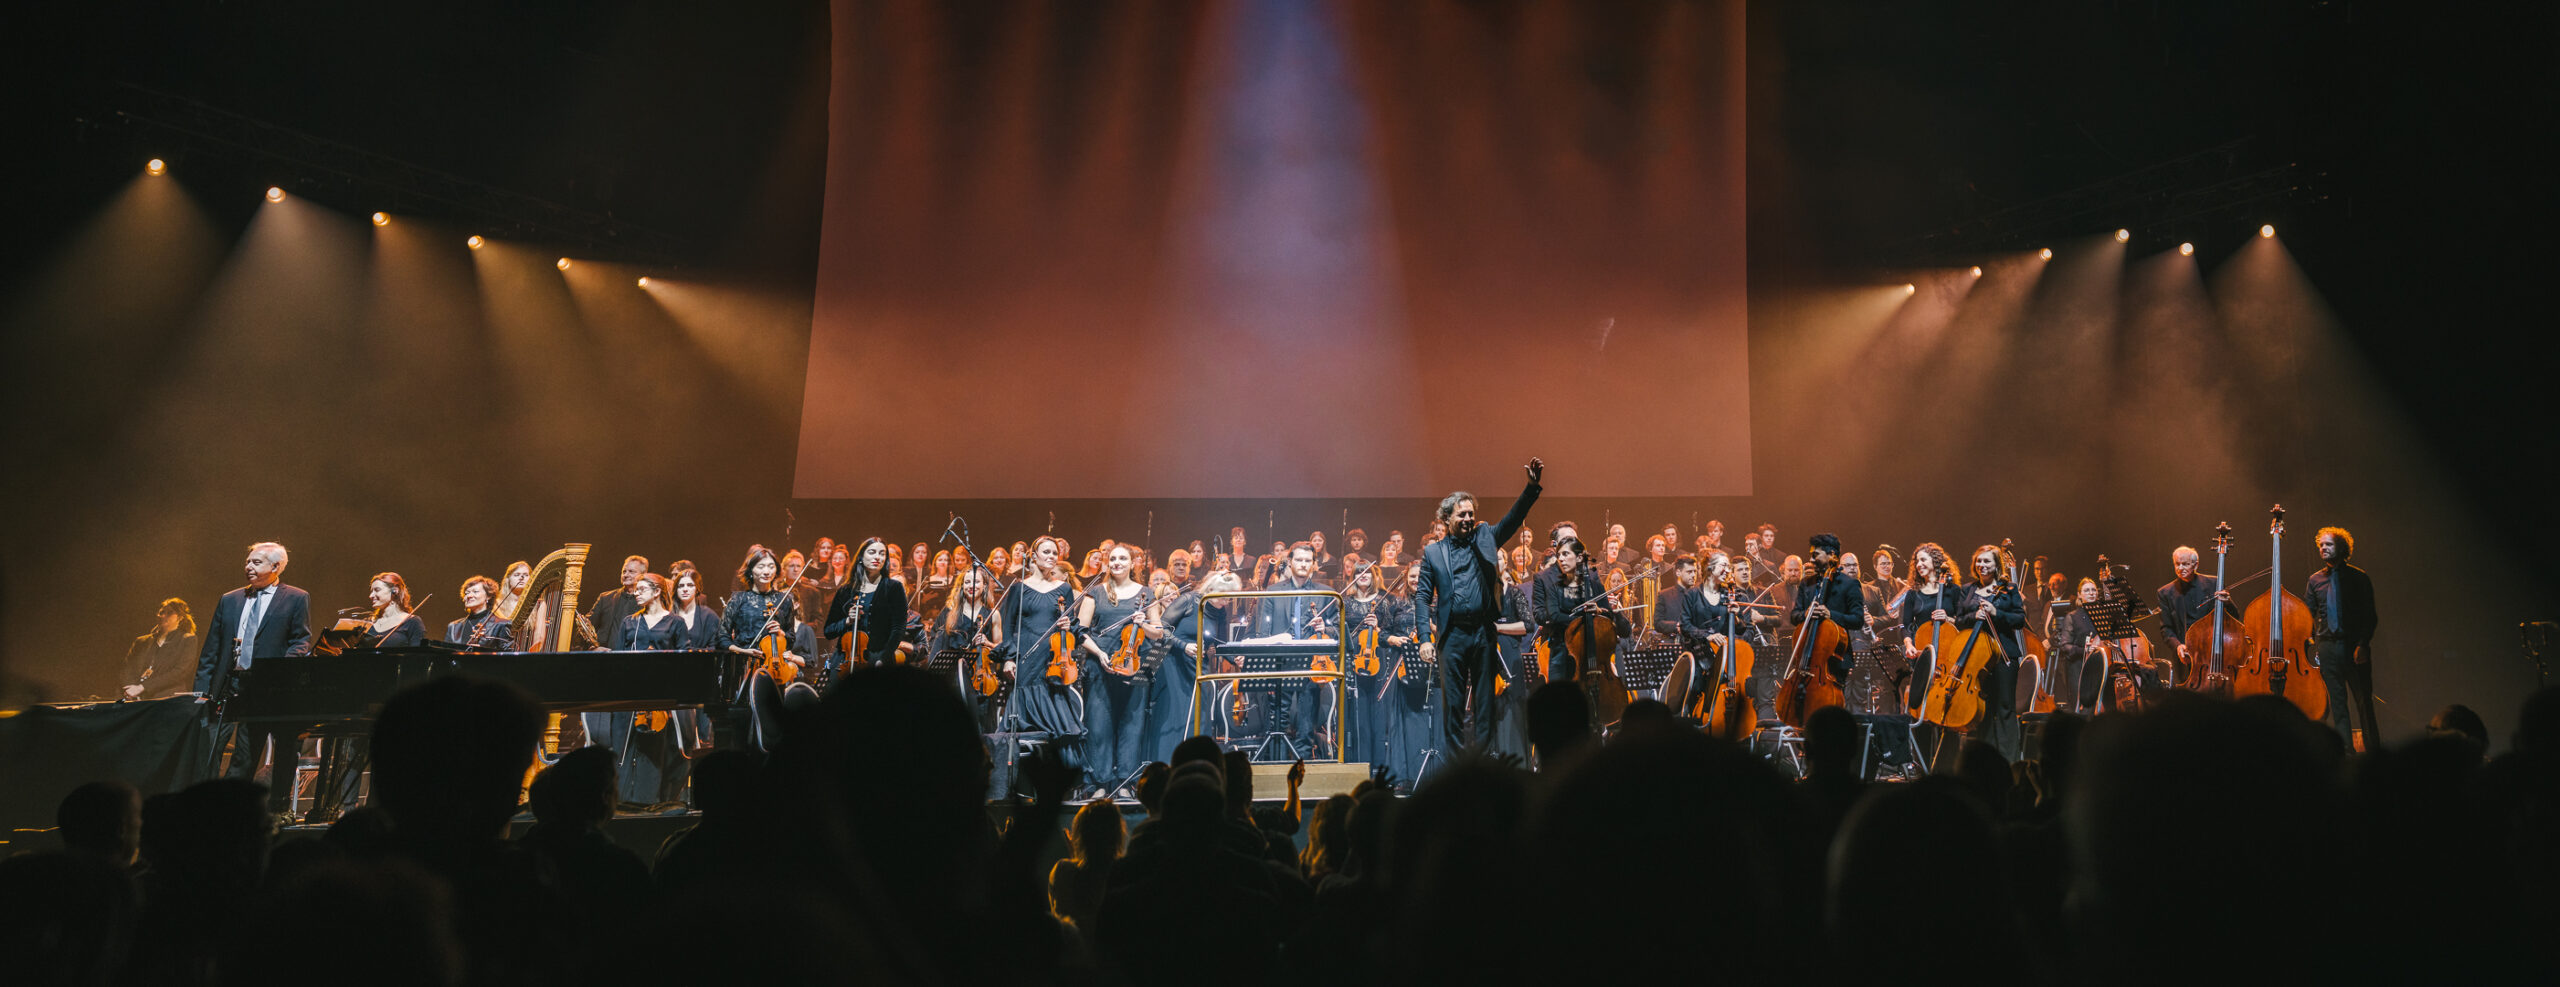 Morricone_Brussels-77